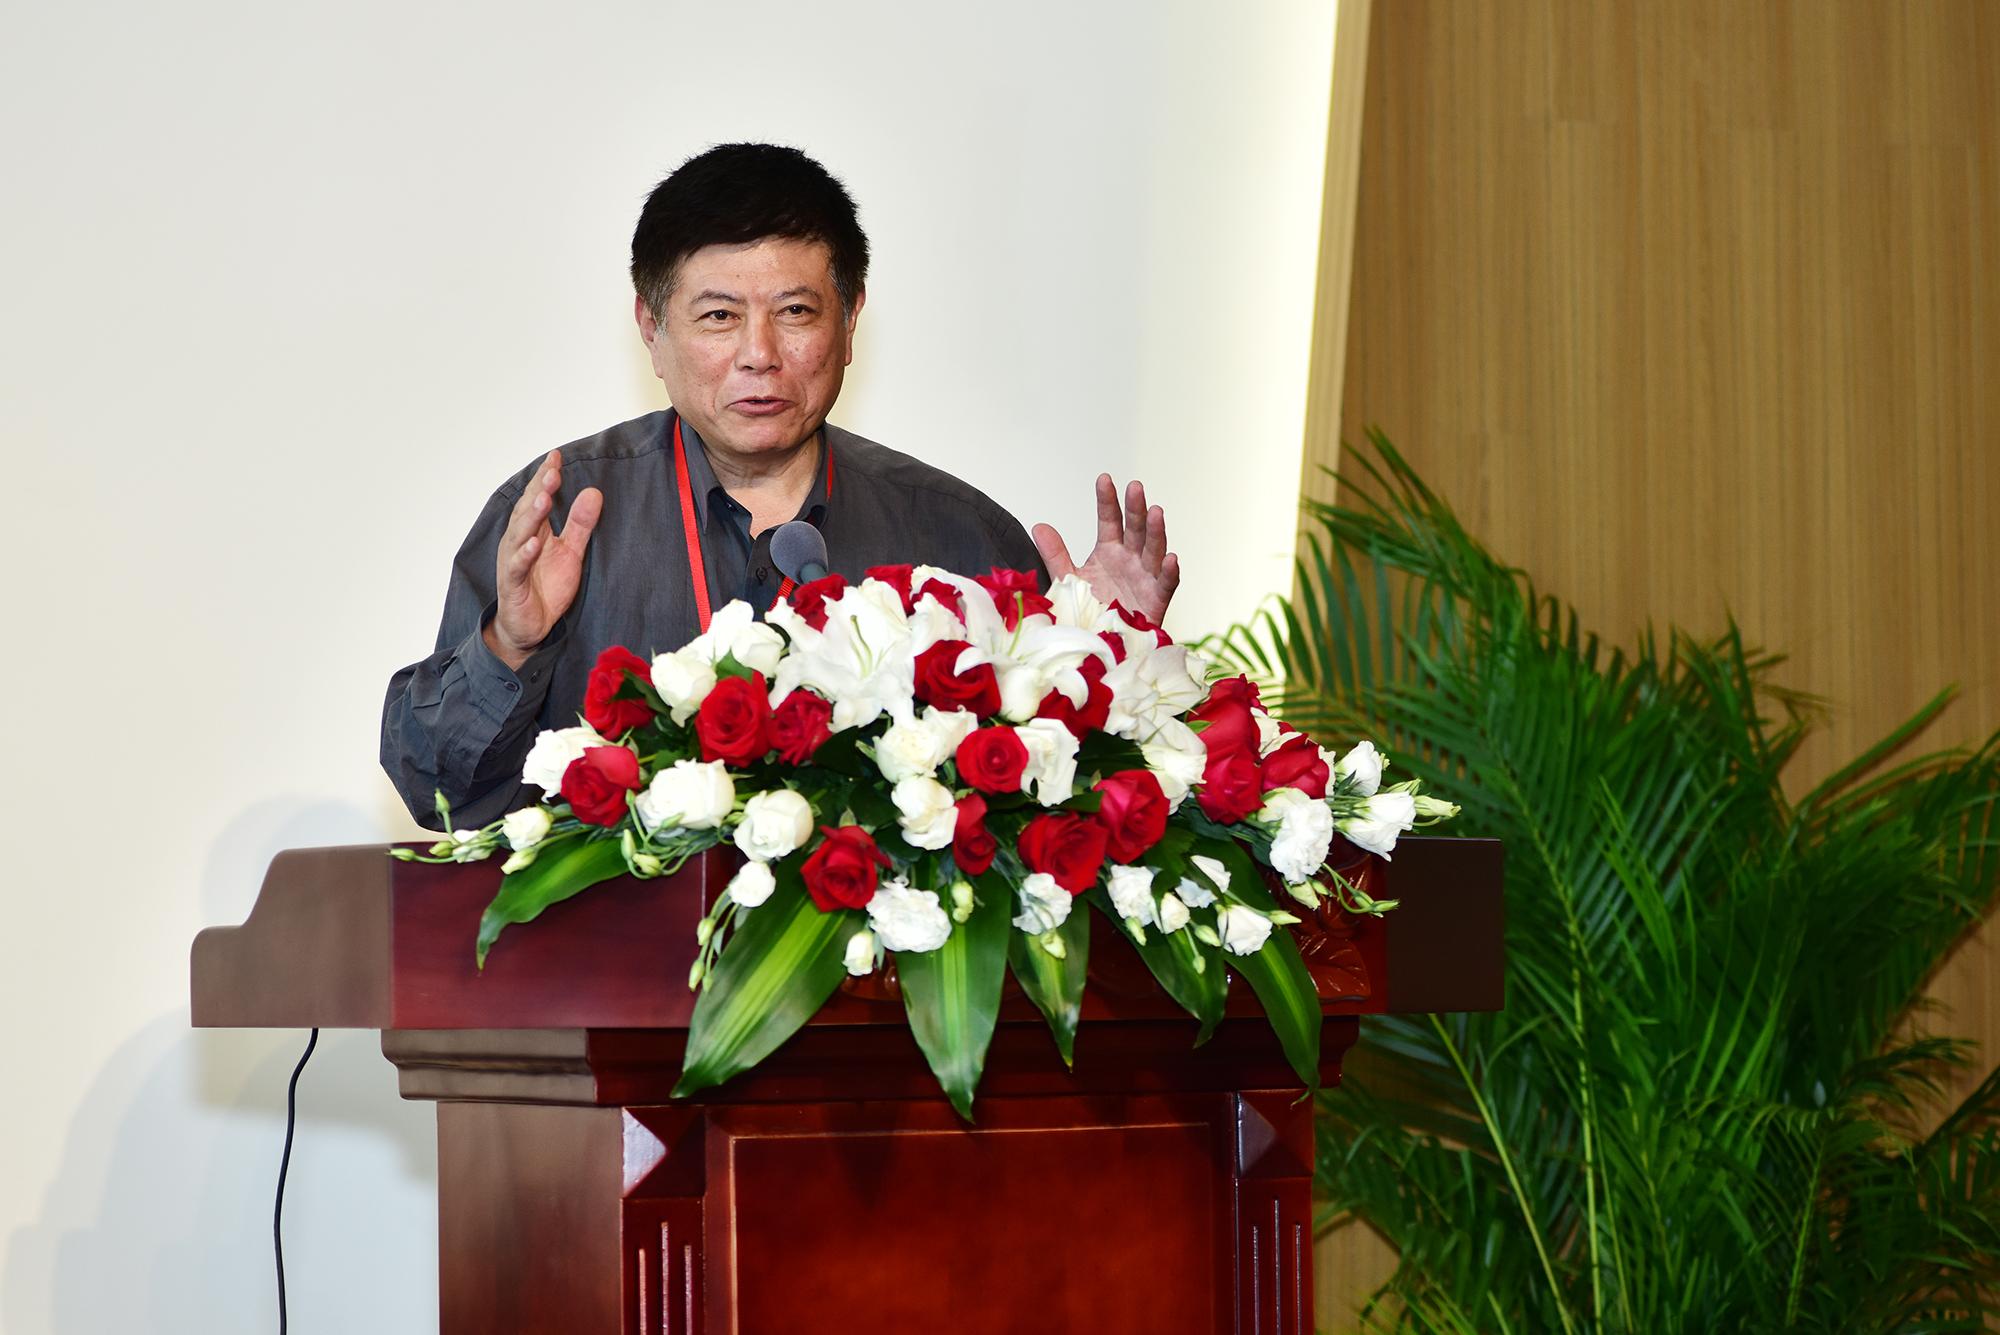 Professor Zhang Zhigang from Peking University delivered an online lecture themed “The Localization Issue of Christianity: From a World Christianity History Perspective” on September 22, 2021.